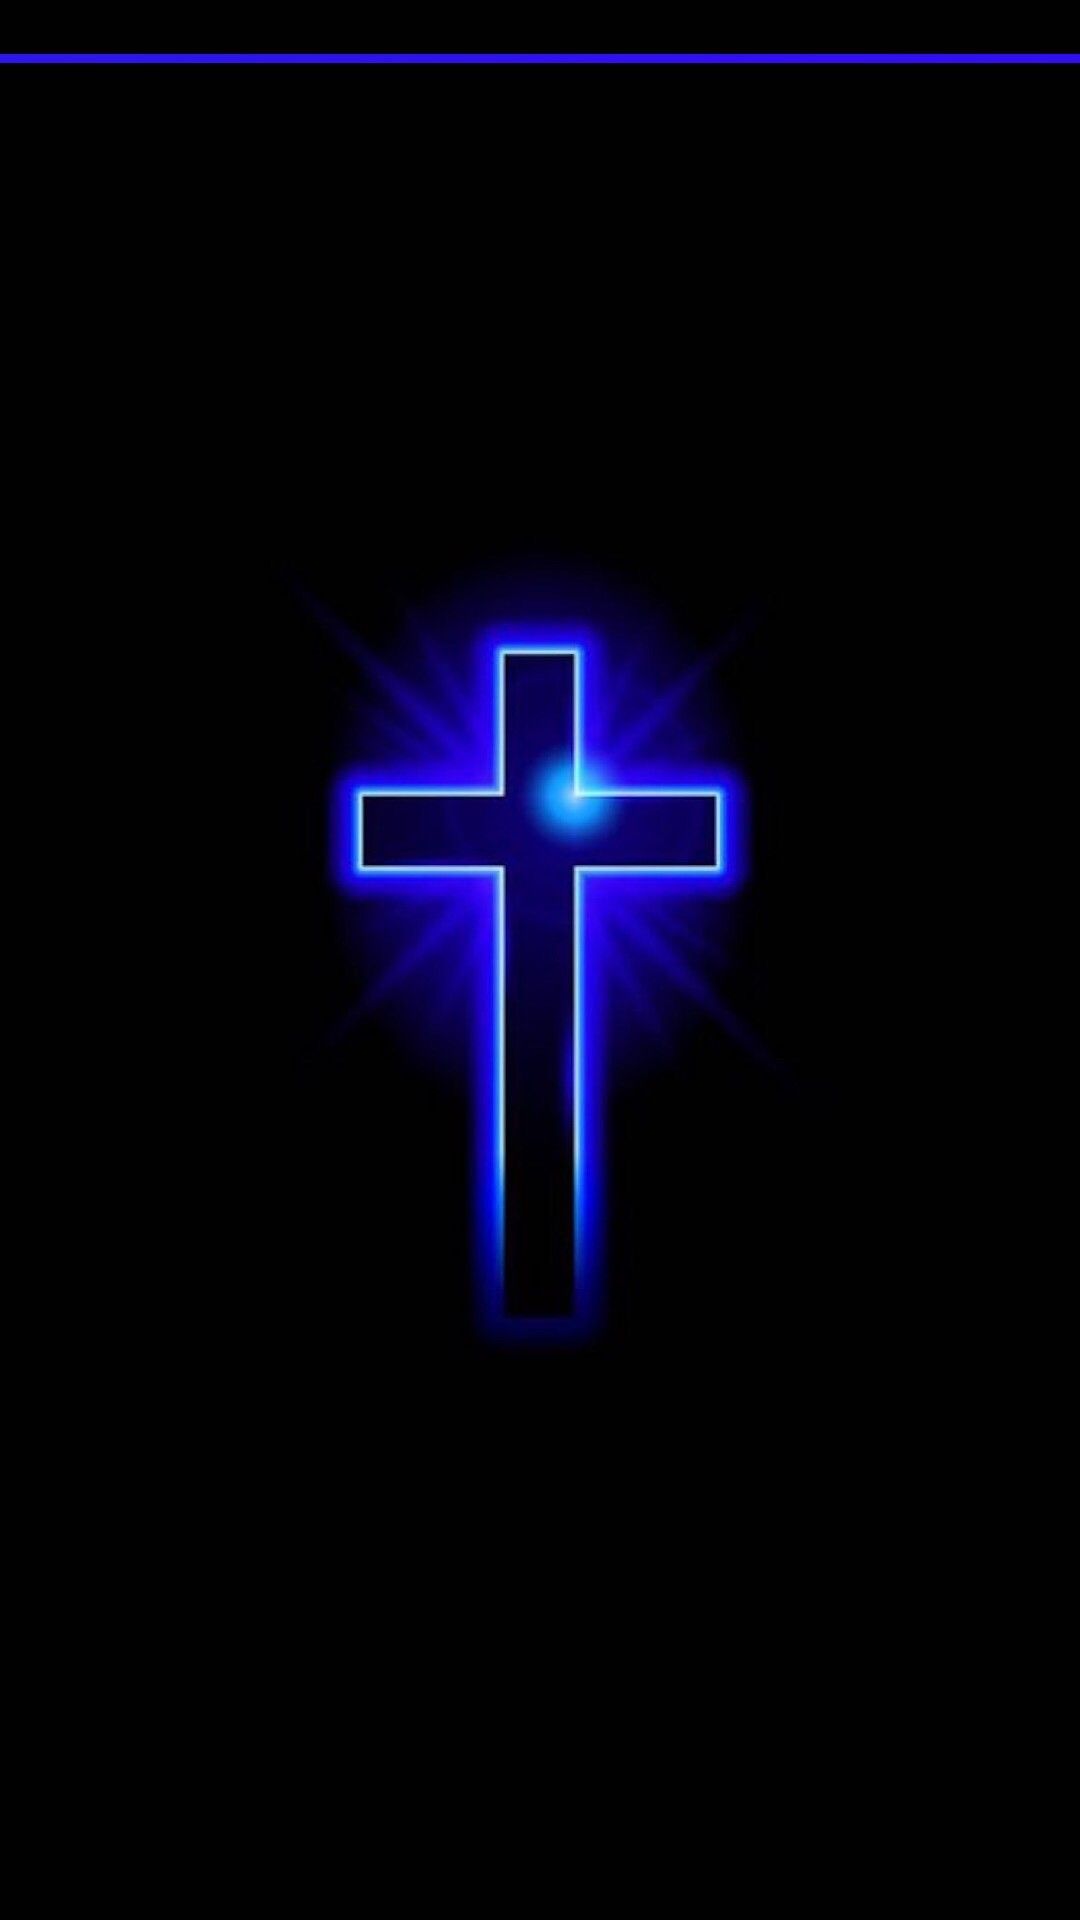 Cross Wallpapers High Quality Hupages Download Iphone